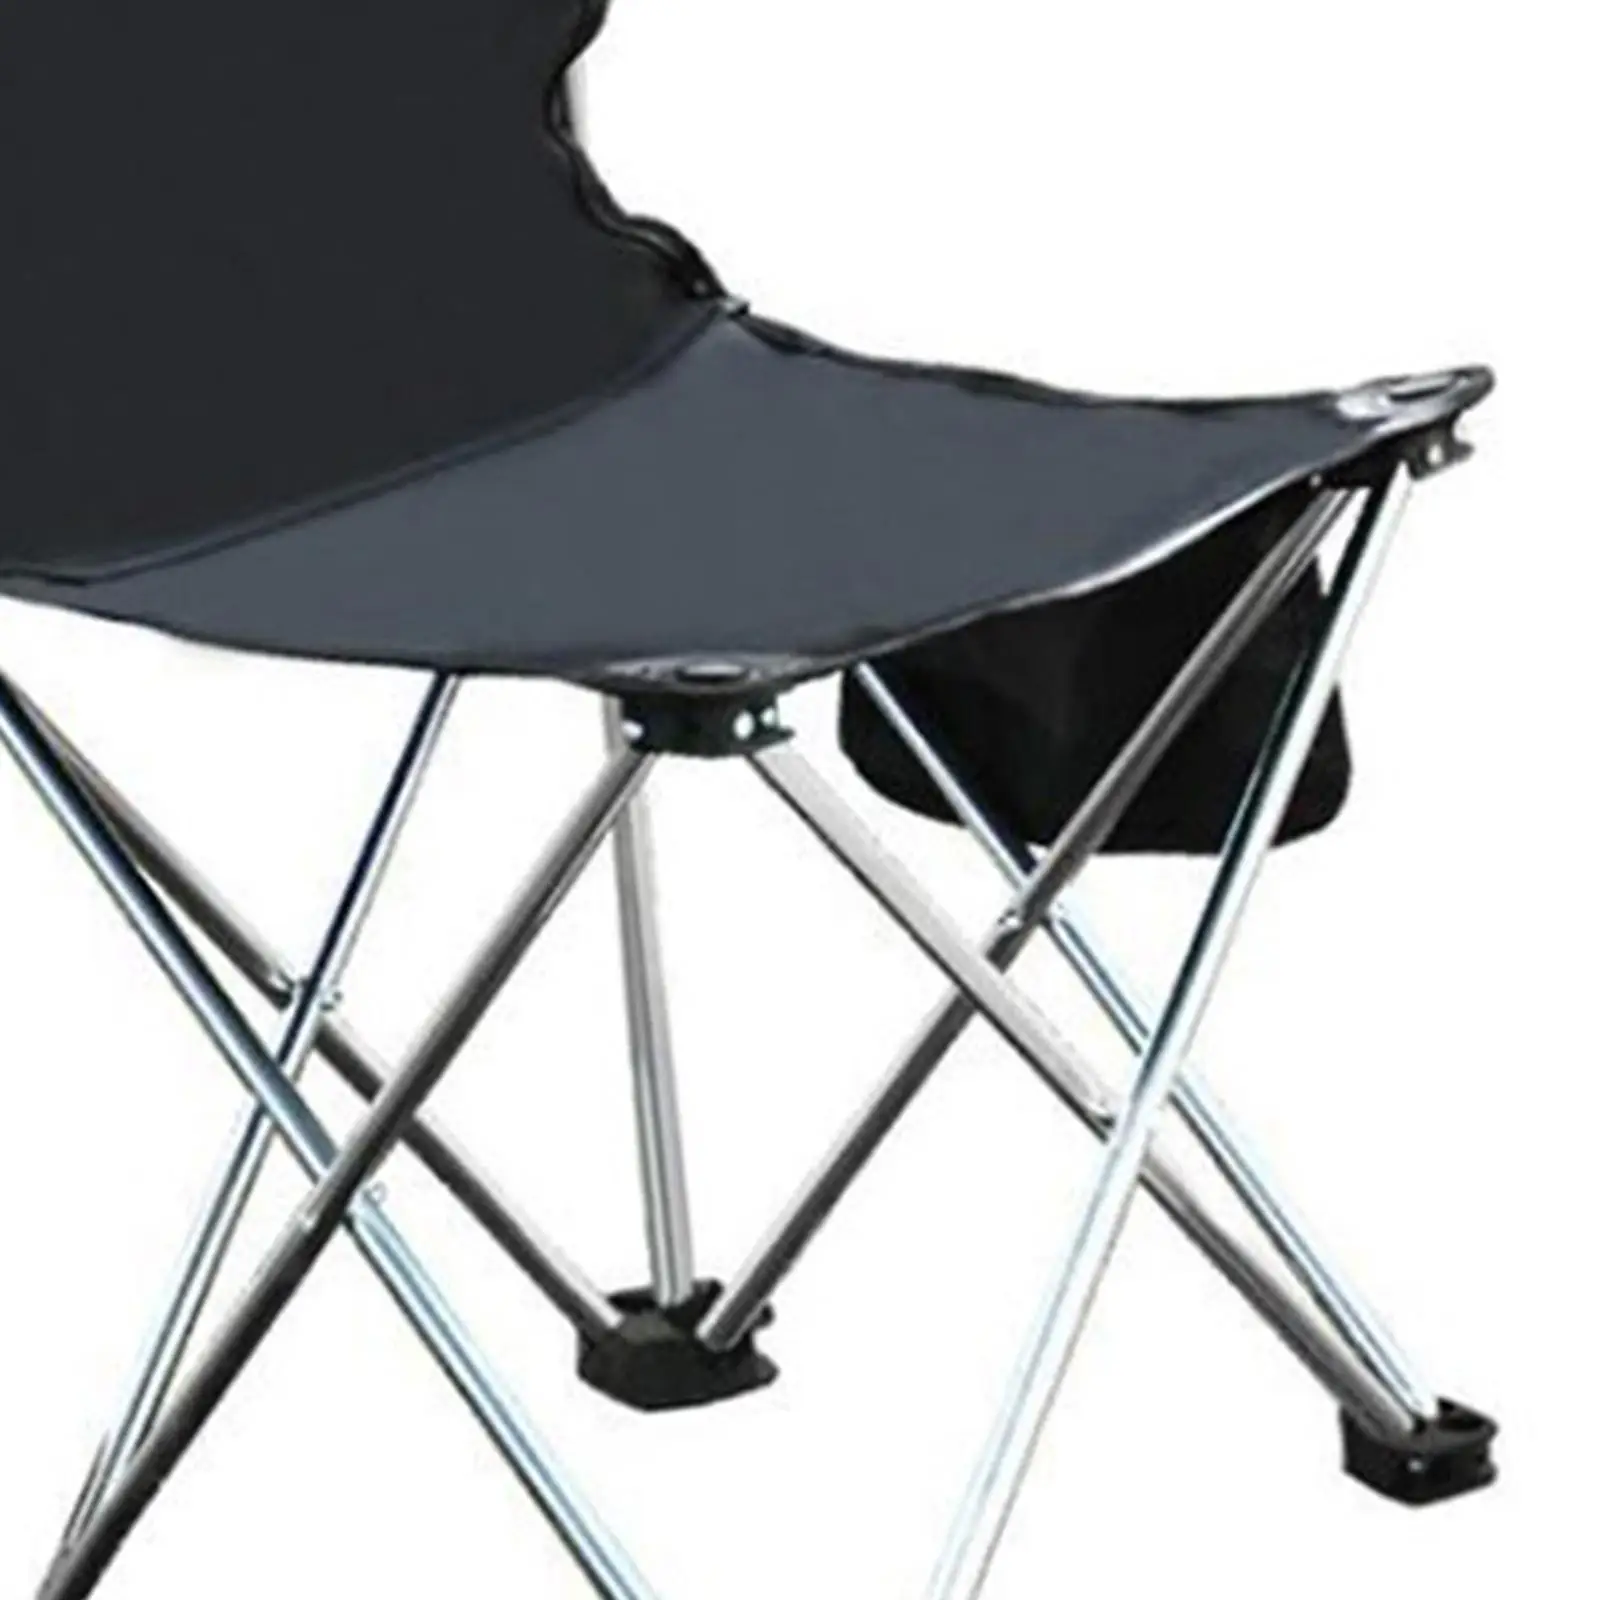 Portable Camping Chair High Back for Heavy People Folding Chair for Outside Collapsible Chair for Park Beach Patio Lawn Hiking